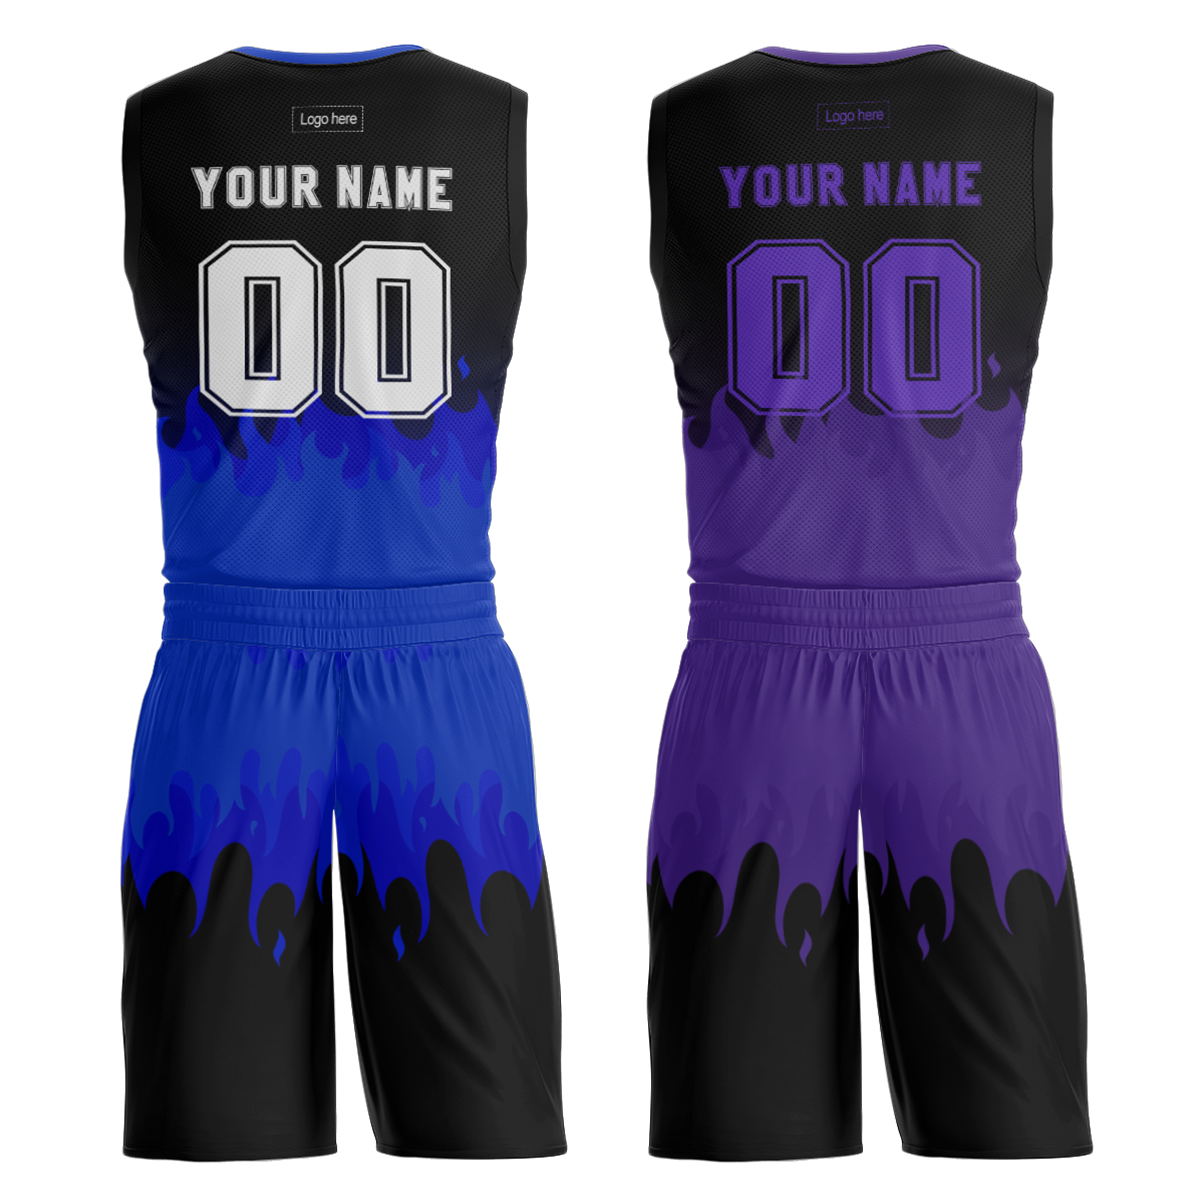 Wholesales Reversible Basketball Jersey Custom Personalized Print Your Name Number Basketball Team Uniform Shirts for Adult